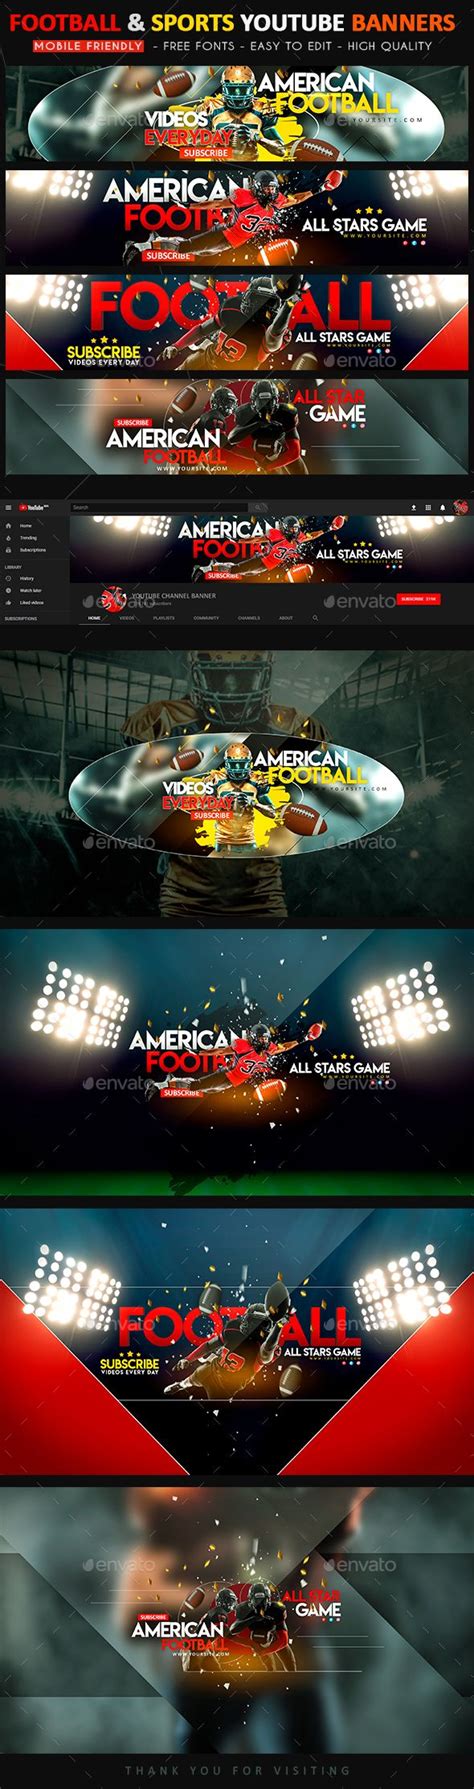 Football Andthese American Football And Sportsyoutube Banners Will Make It